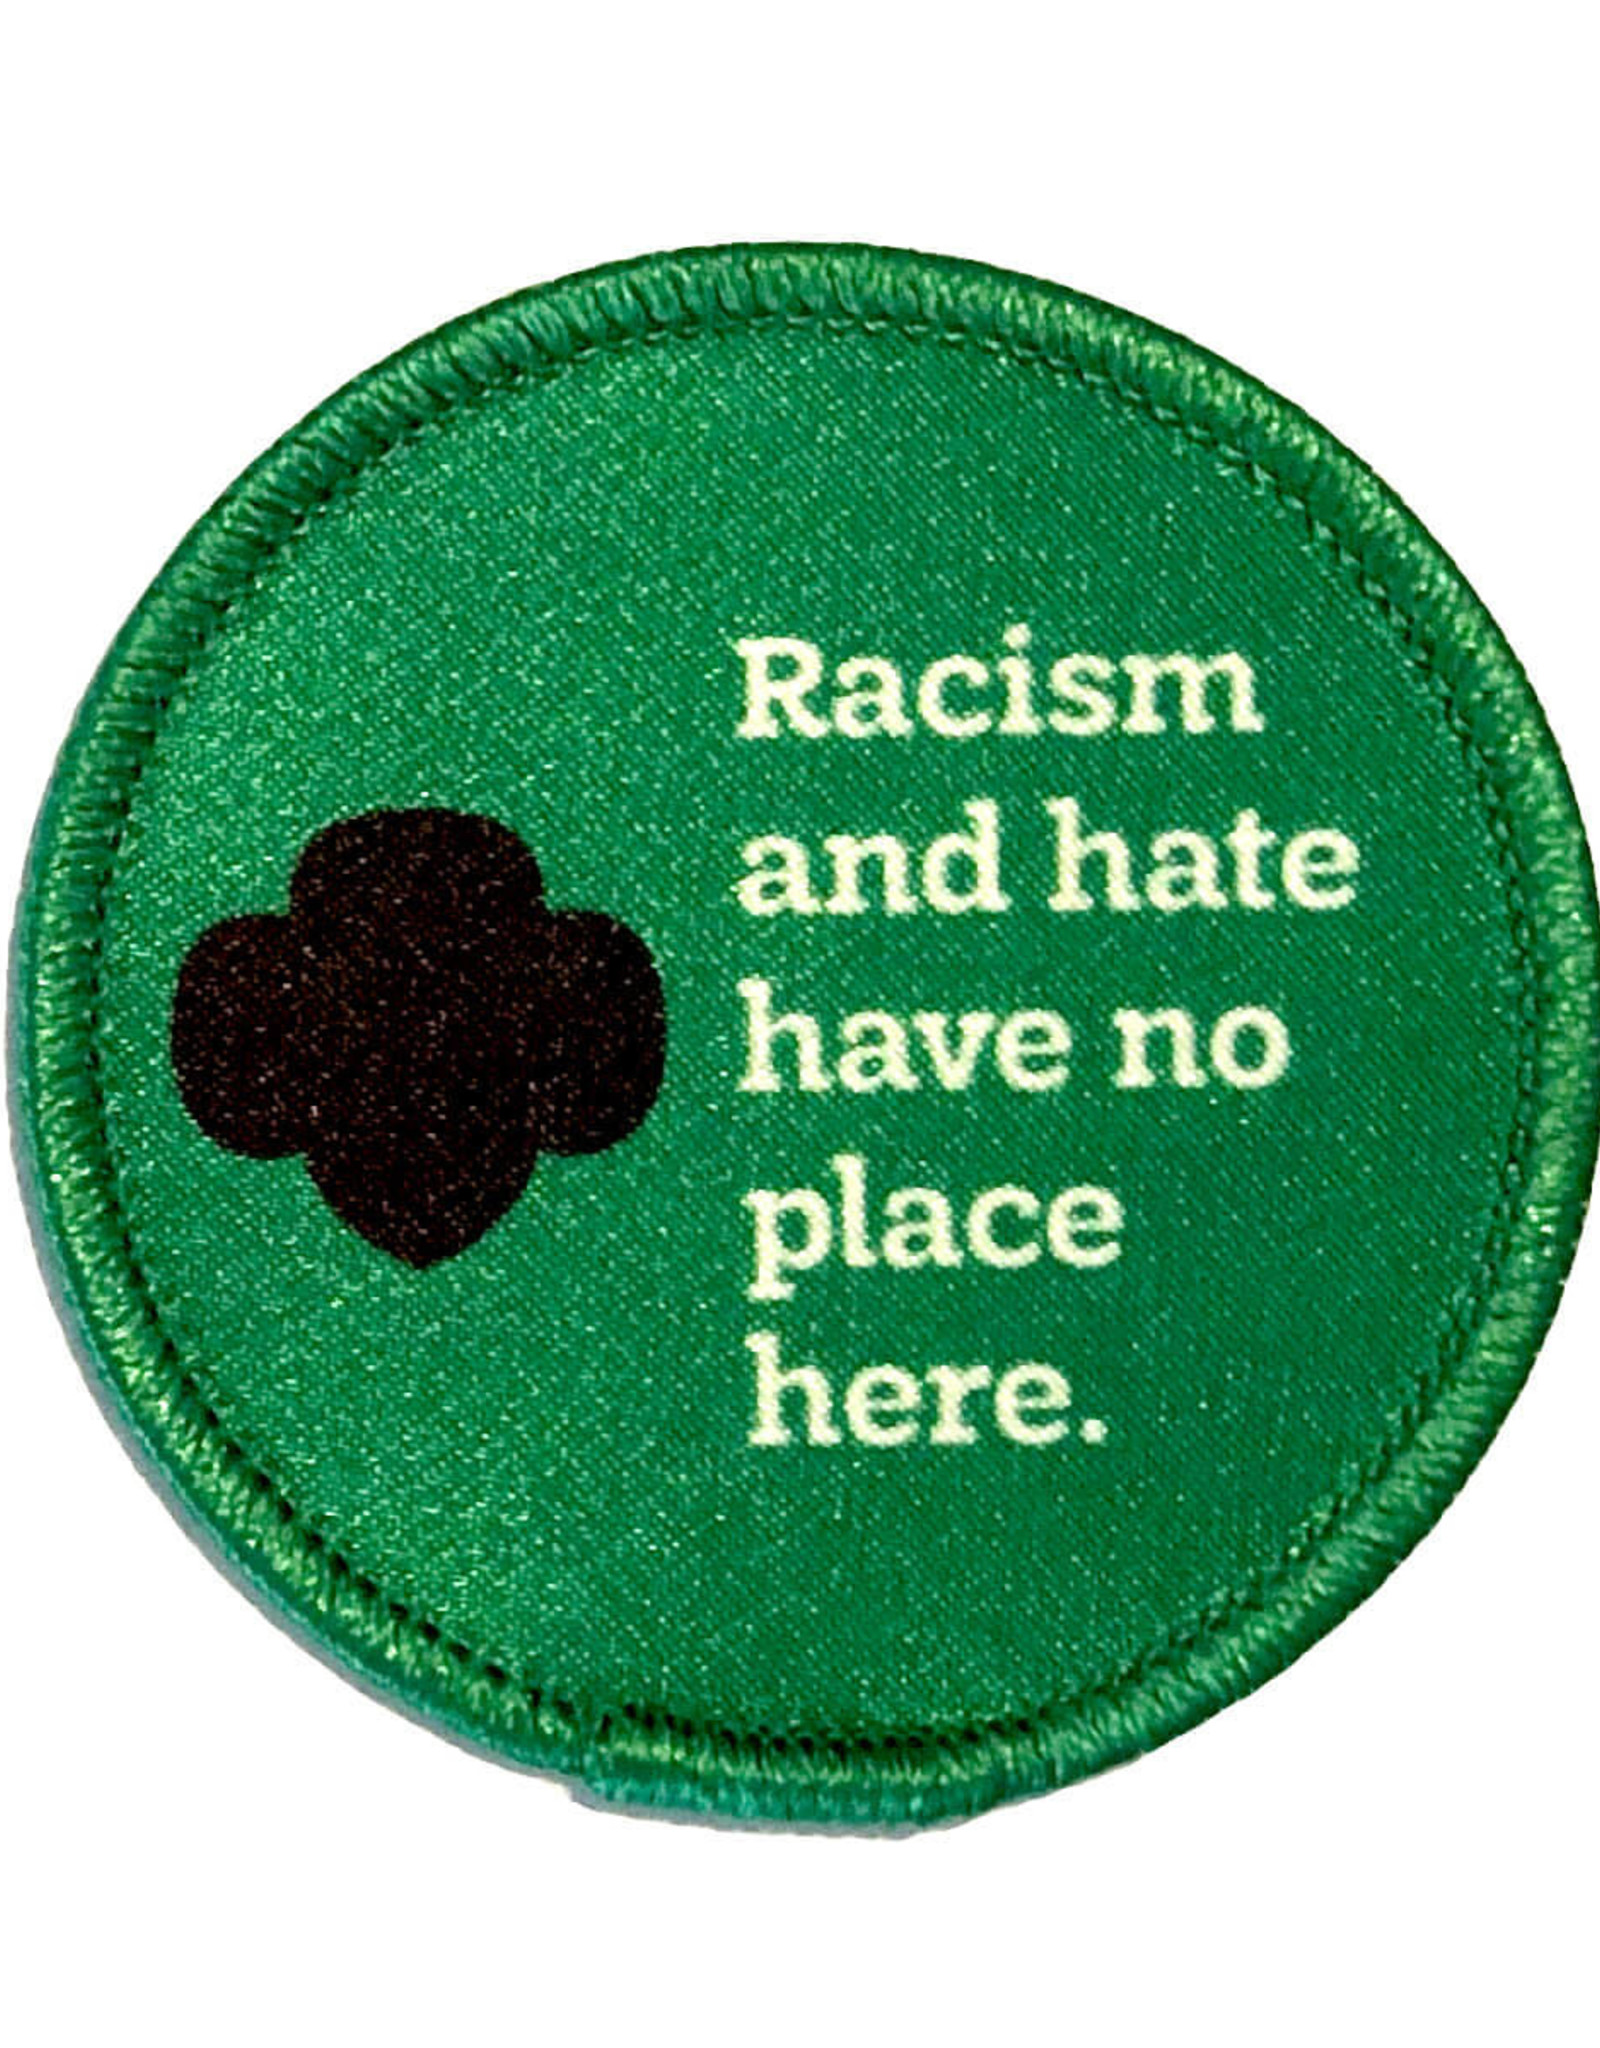 GIRL SCOUTS OF THE USA Anti-Racism Sew-On Patch